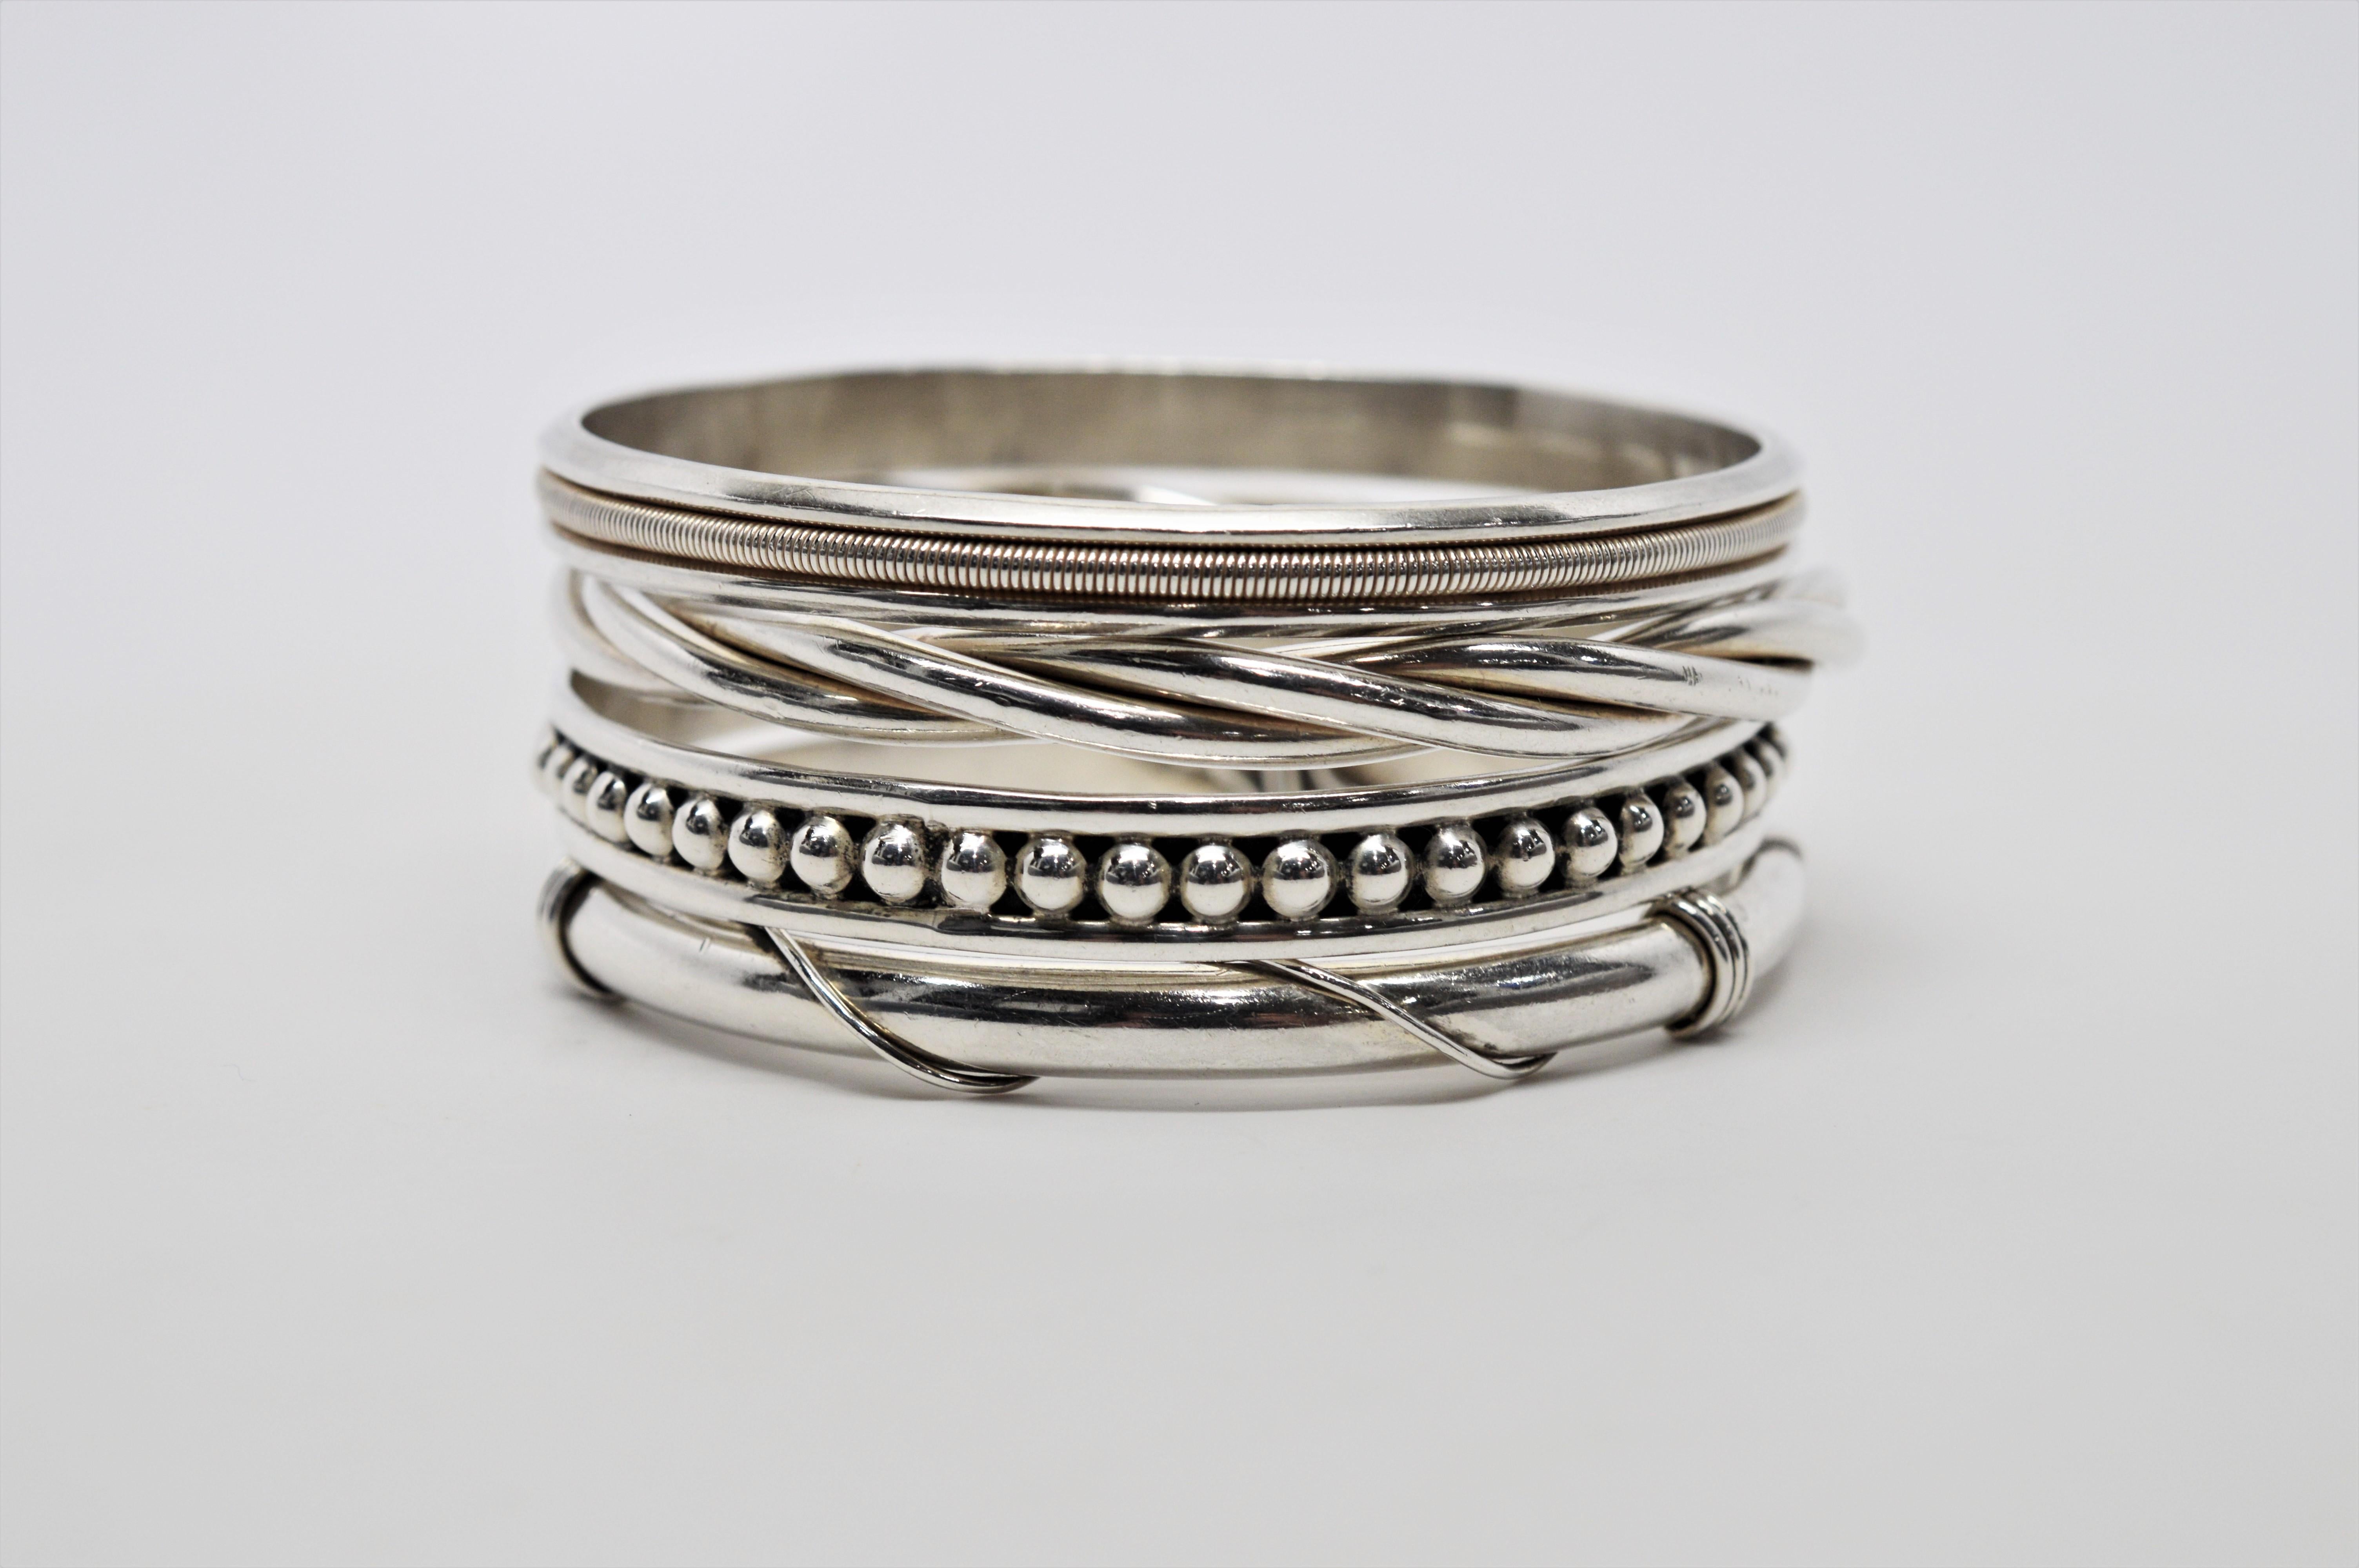 Attention bangle bracelet lovers! Check out this eclectic stack of artisan sterling silver bracelets. Includes a set of four unique but complimenting bracelet styles, measuring 2-3/4 inches in diameter each in slip-on style. So many possibilities!   